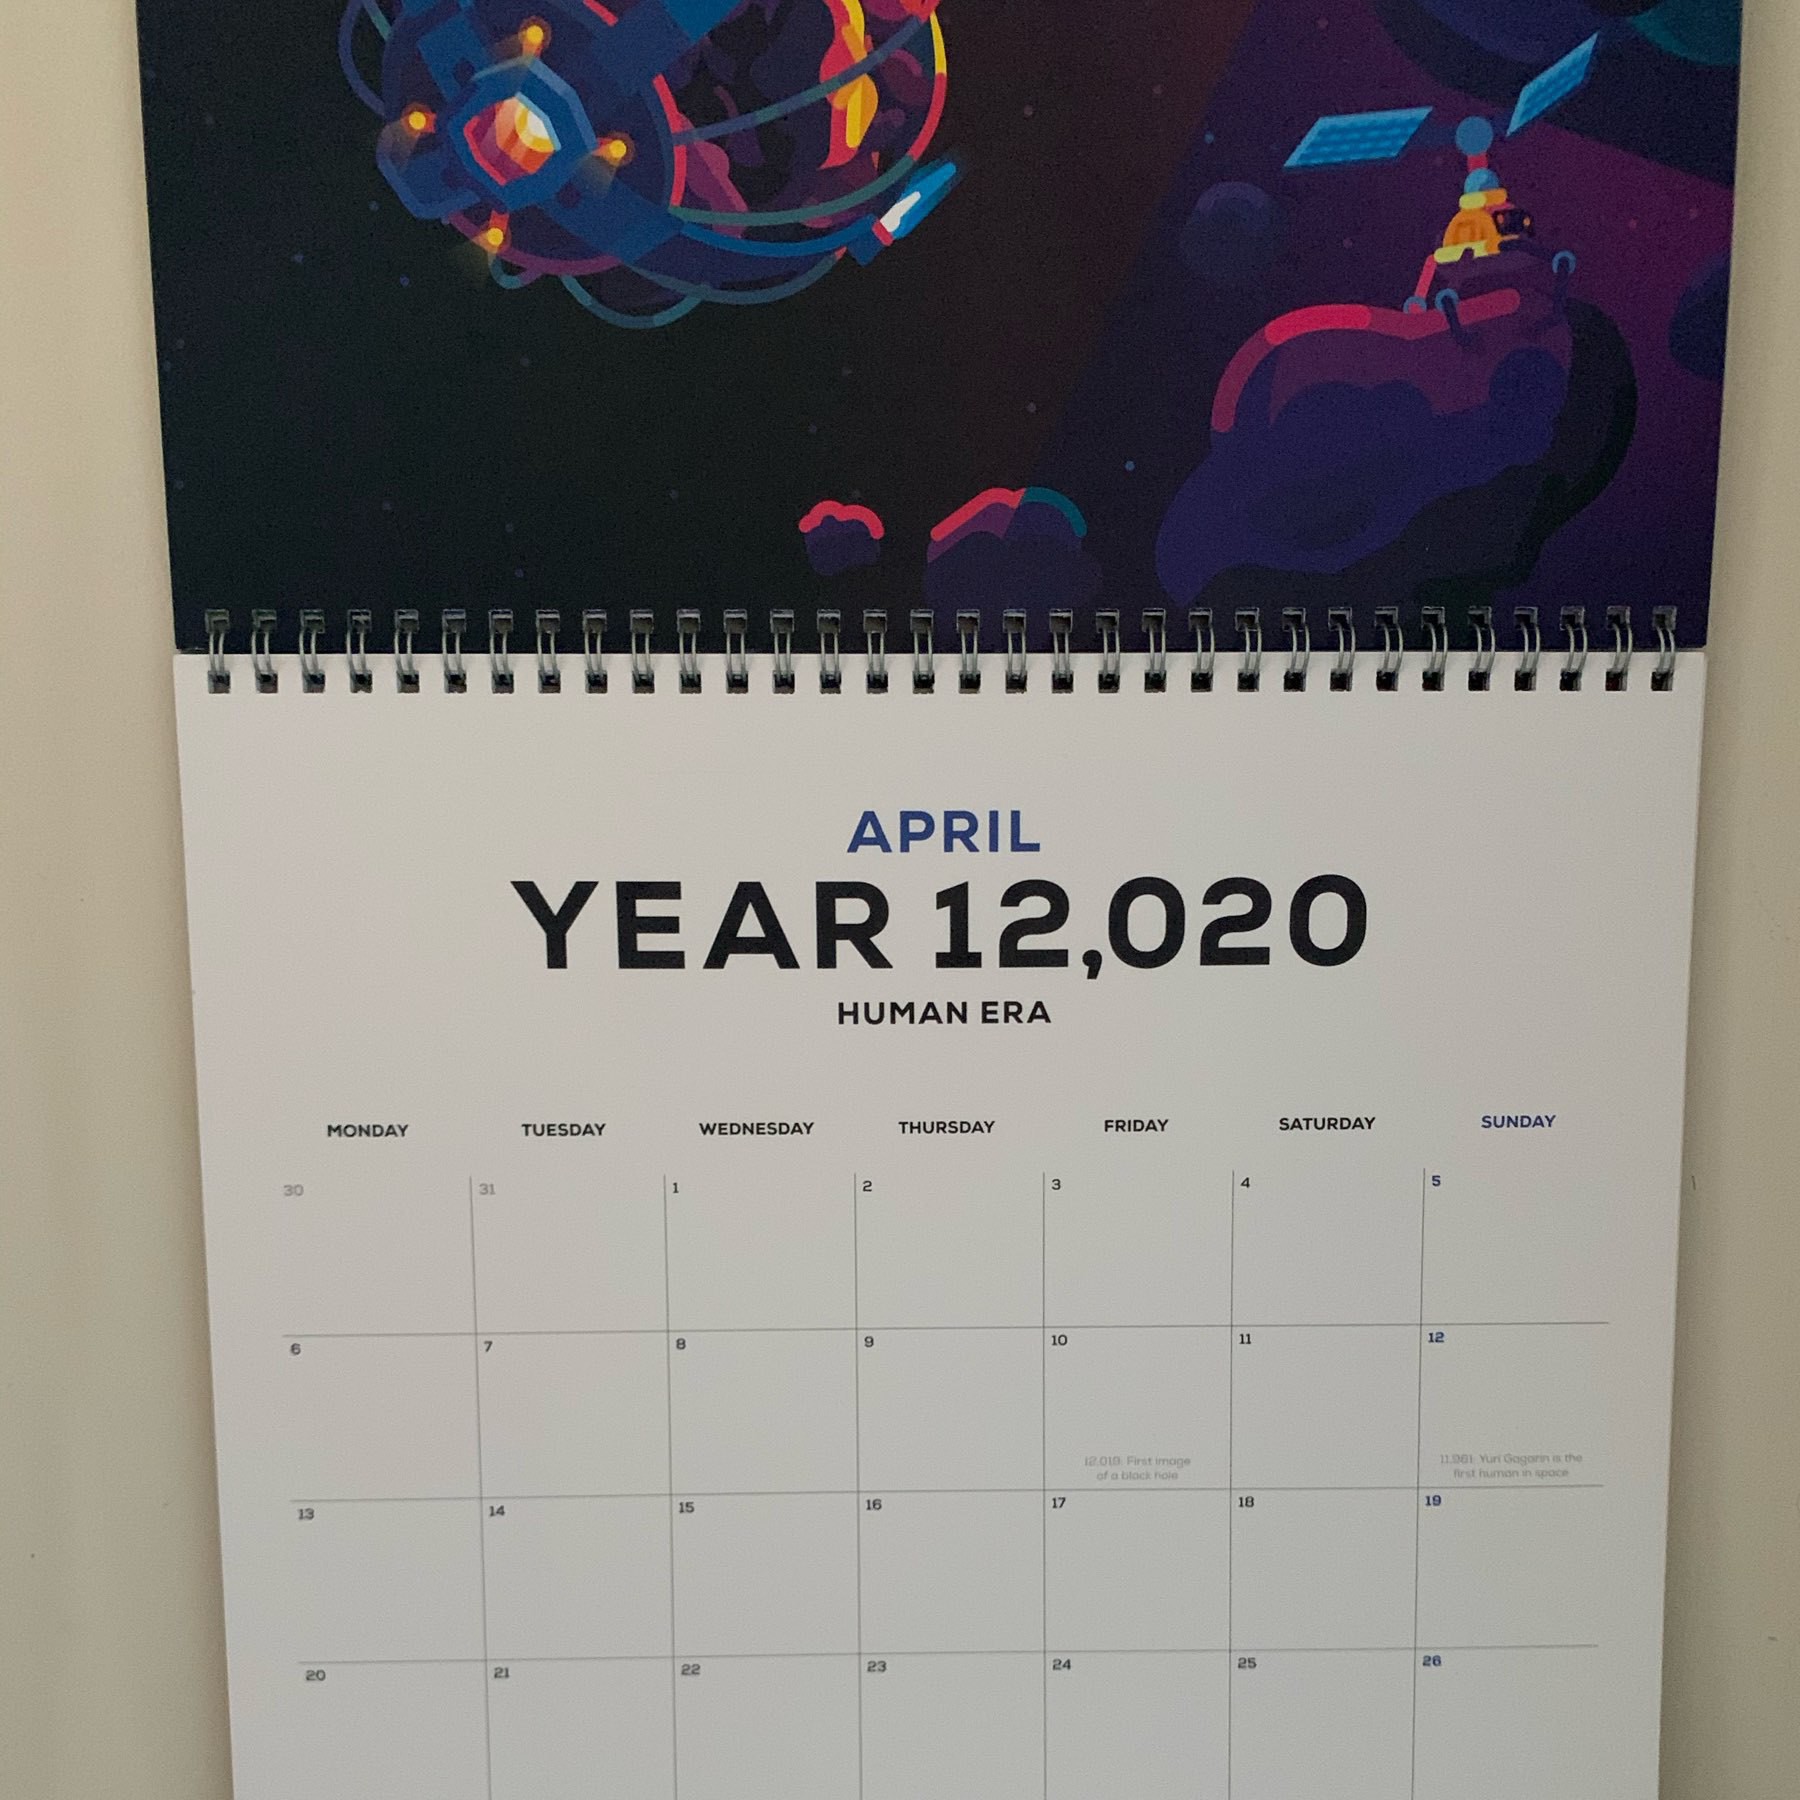 The calendar on my desk, proudly showing April 12,020